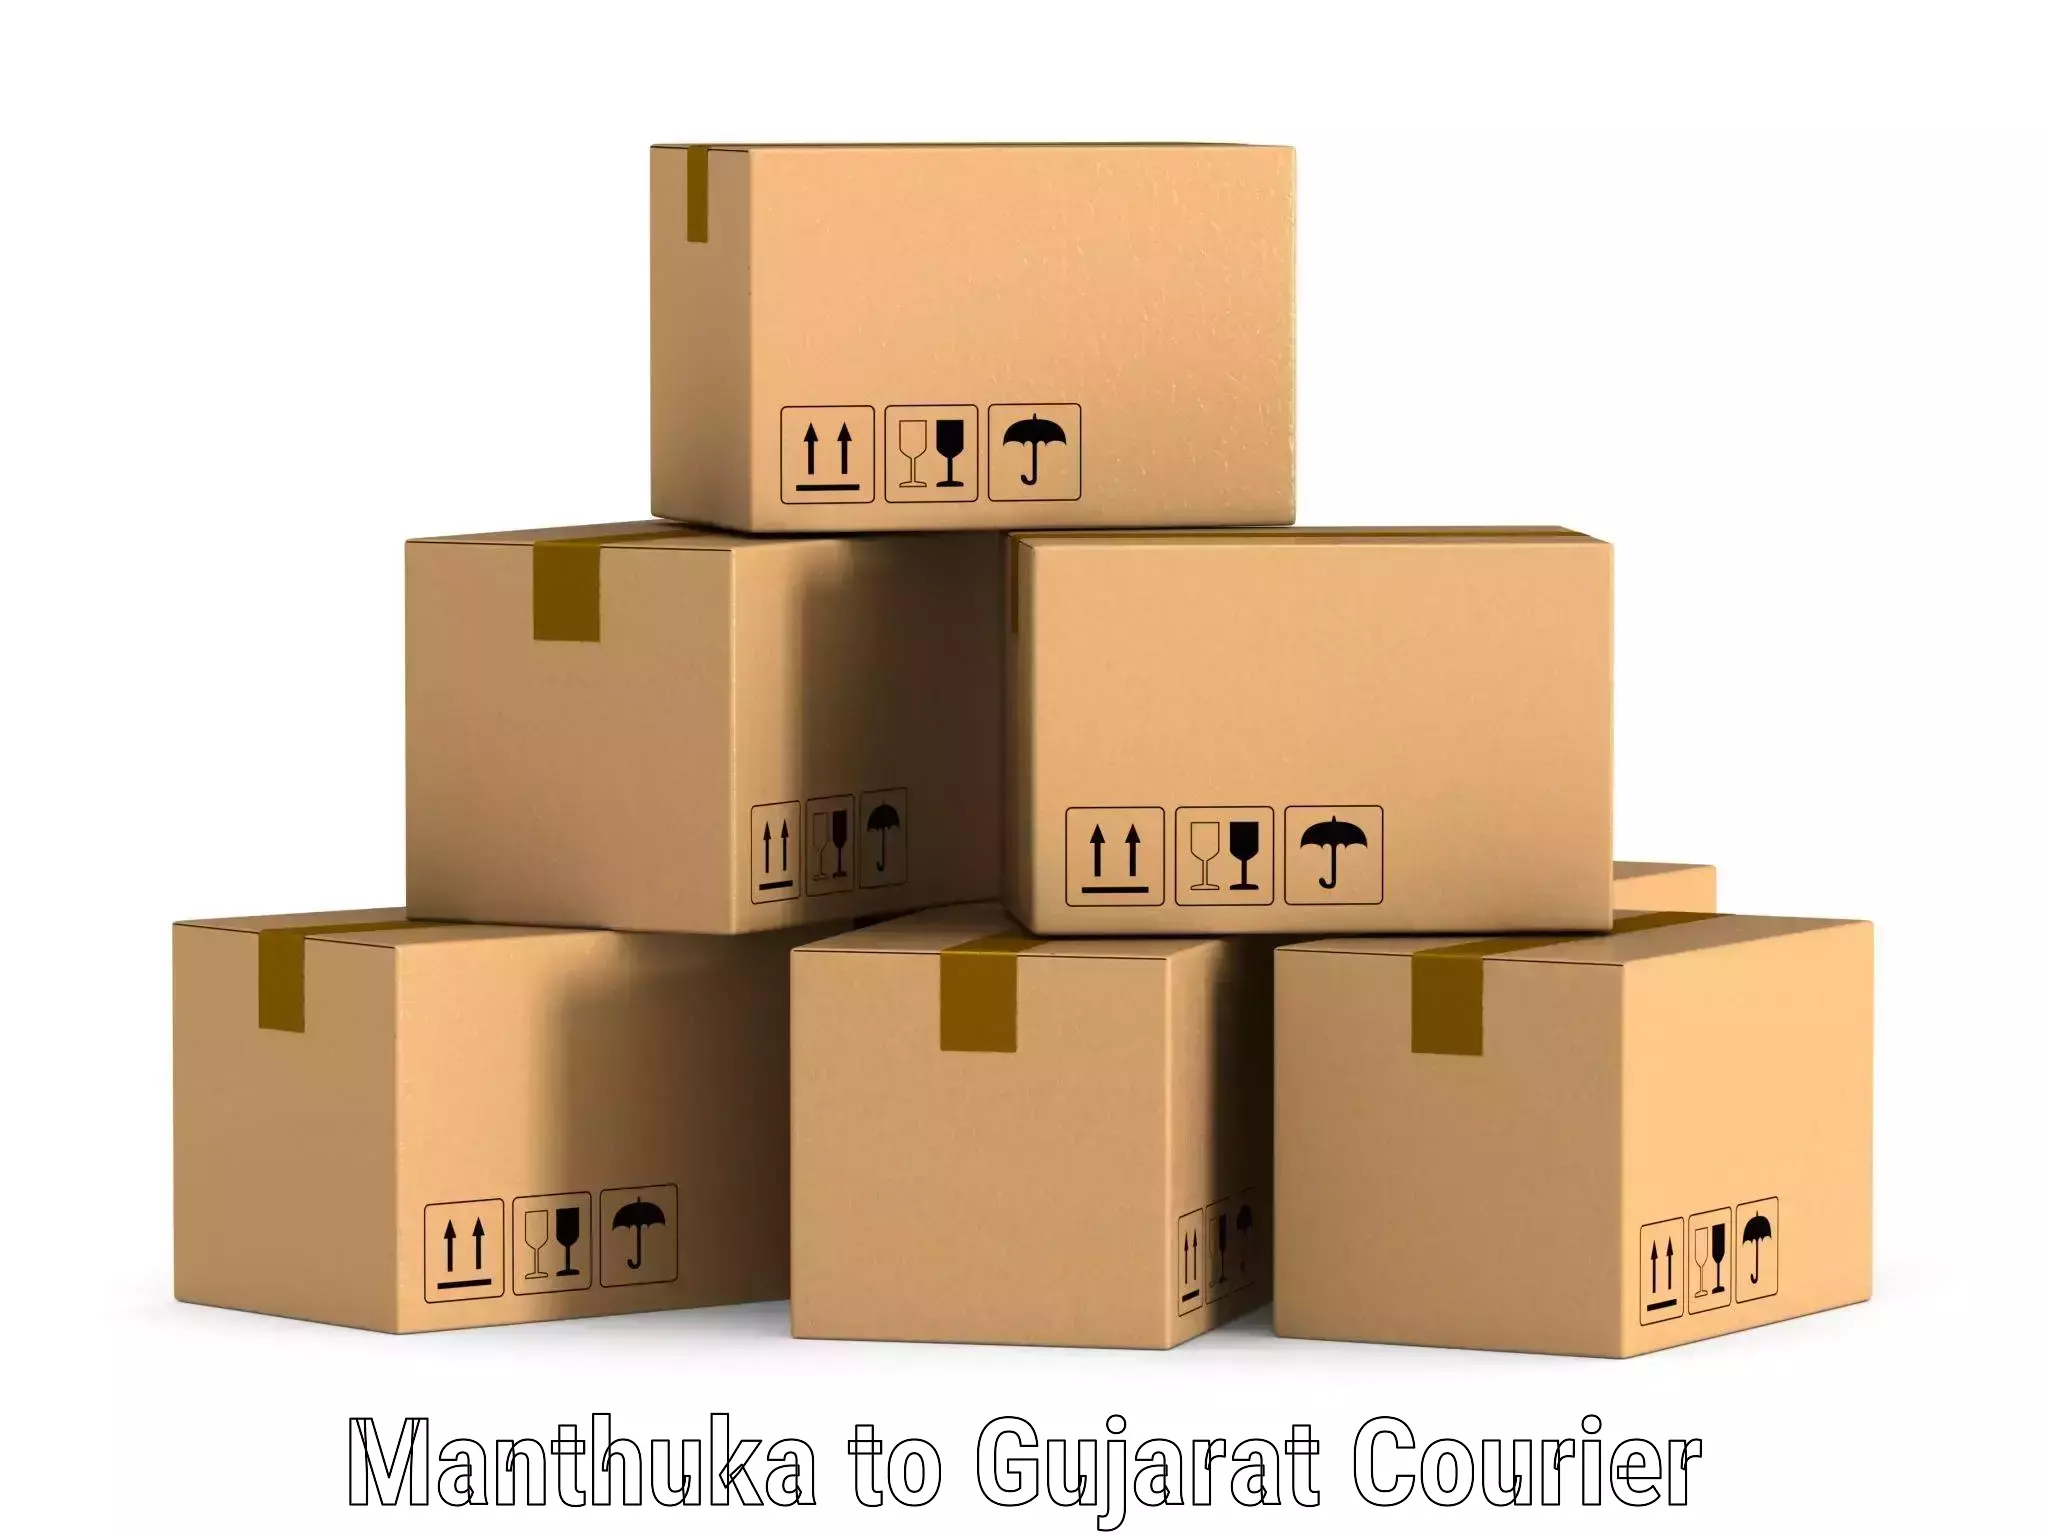 On-time delivery services Manthuka to Gujarat